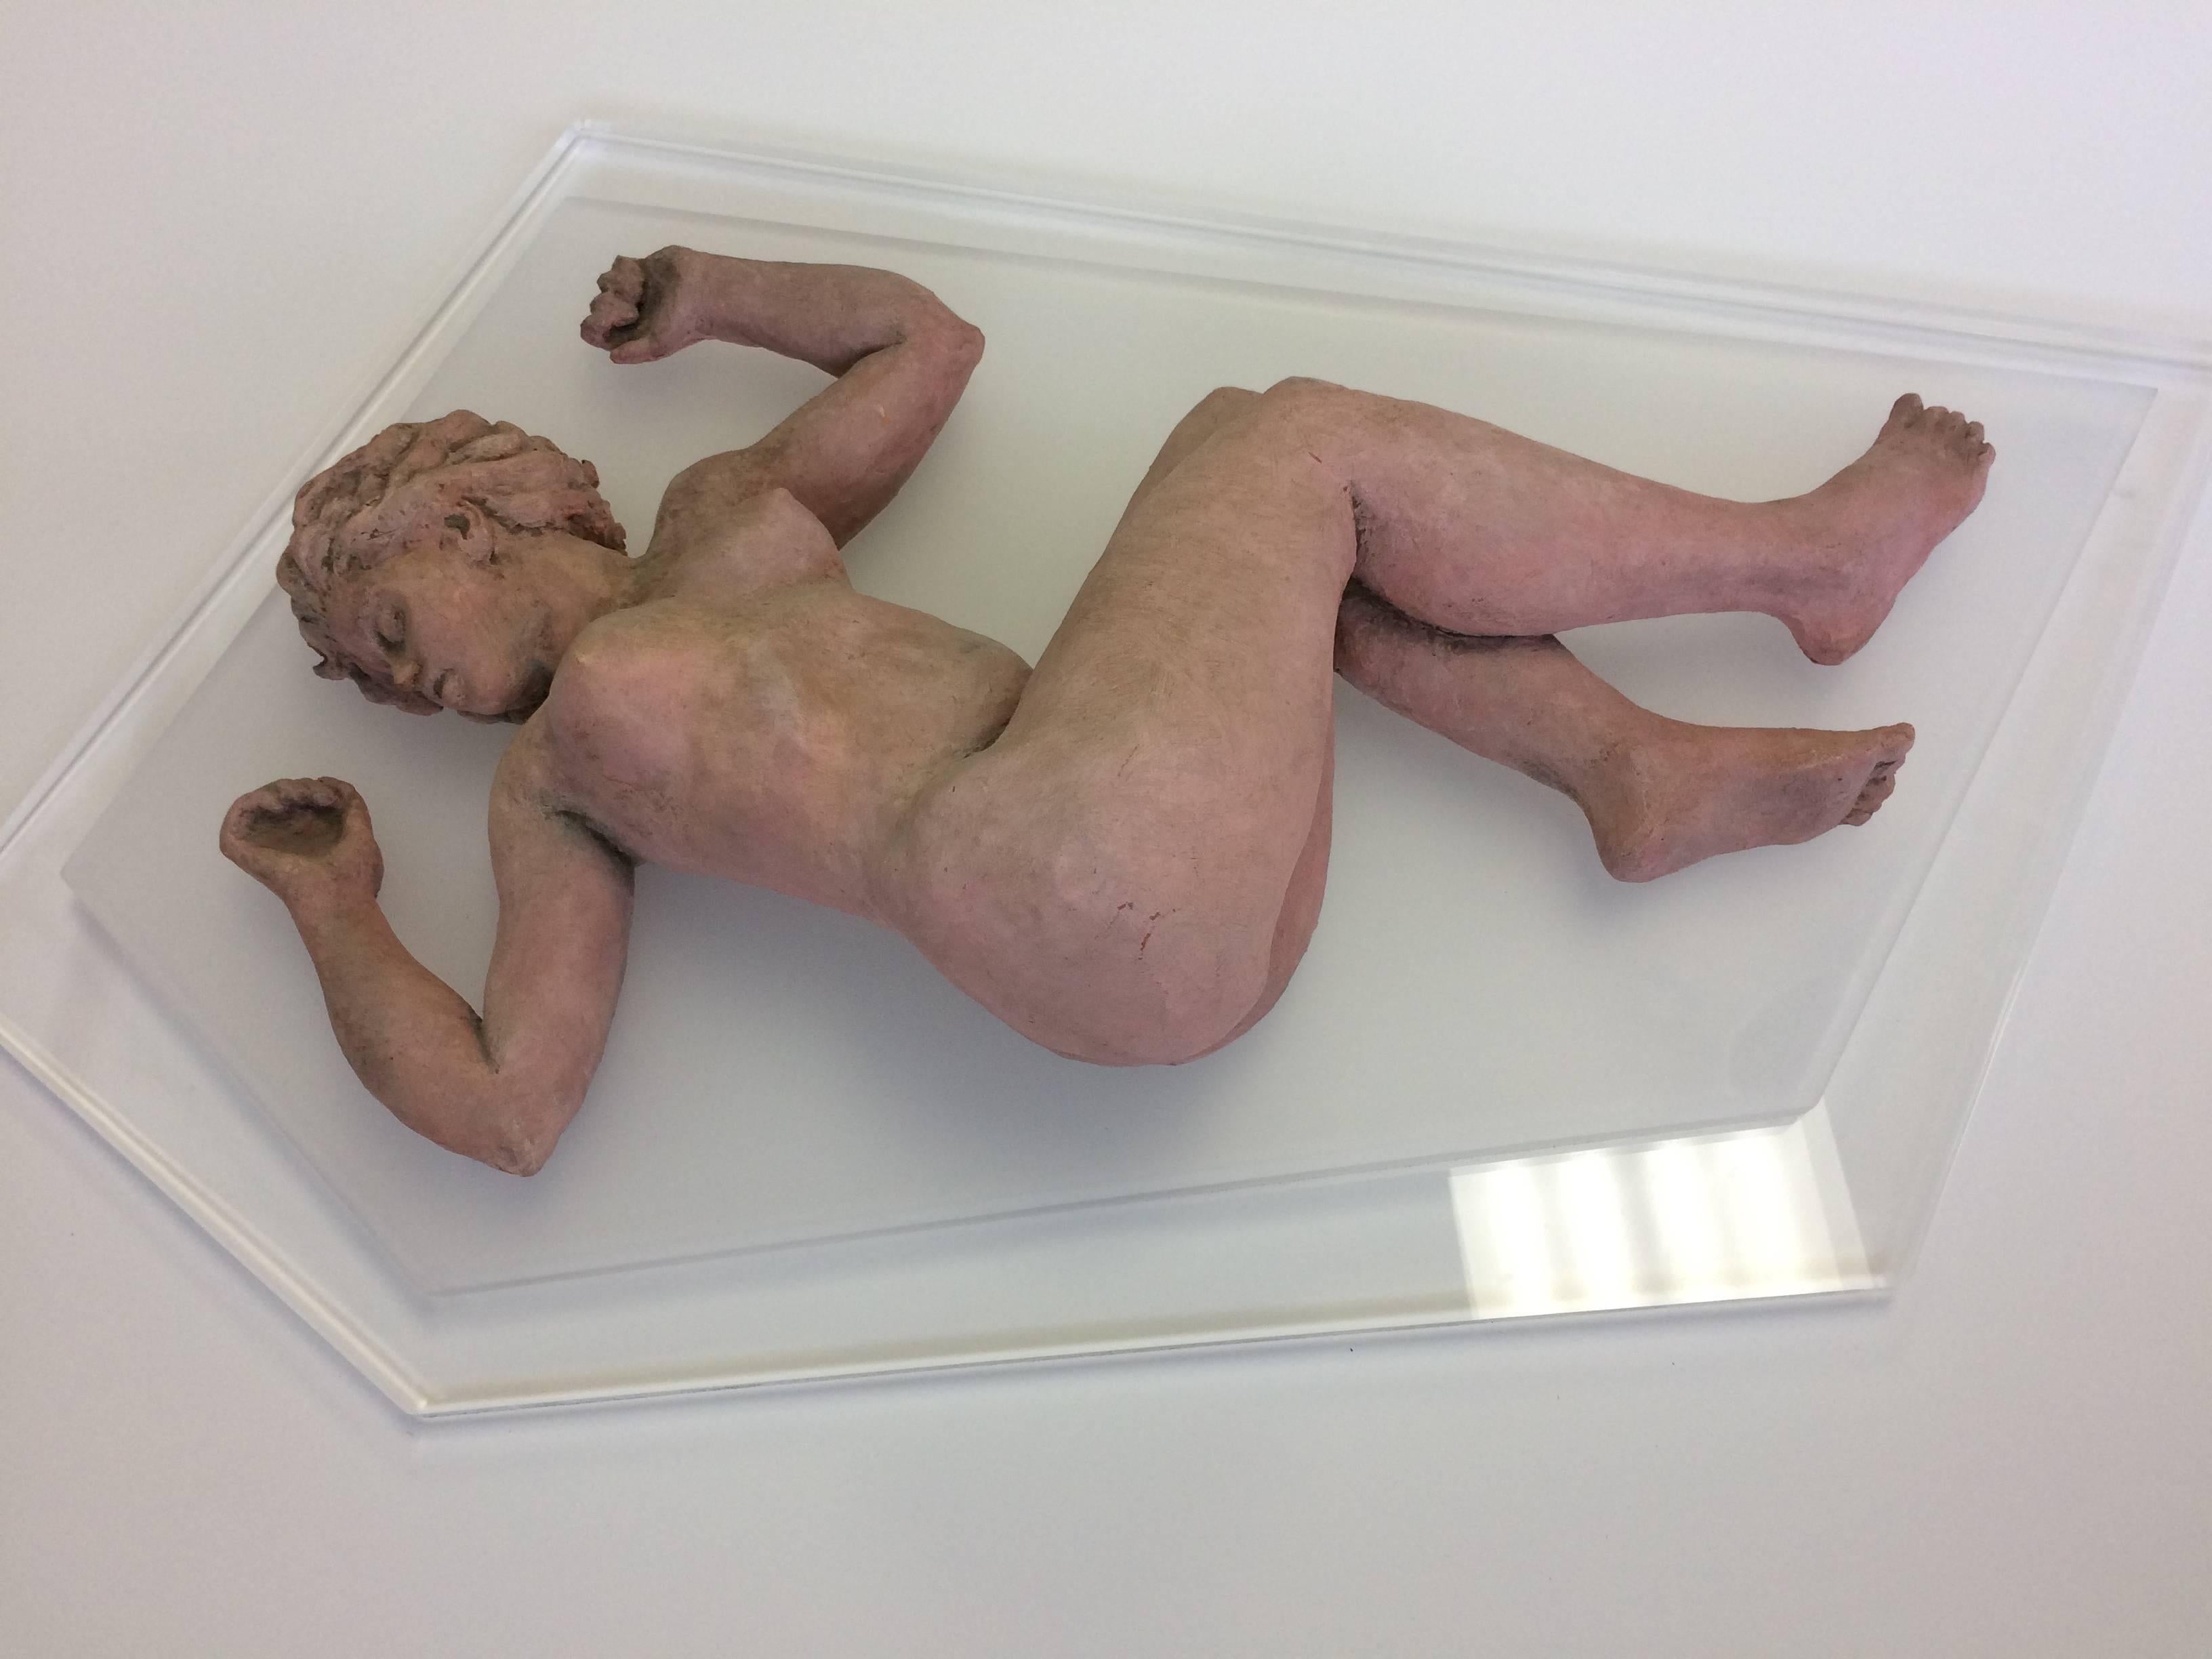  Sleeping Nude Clay Sculpture on Lucite  - Beige Nude Sculpture by Betty Miller